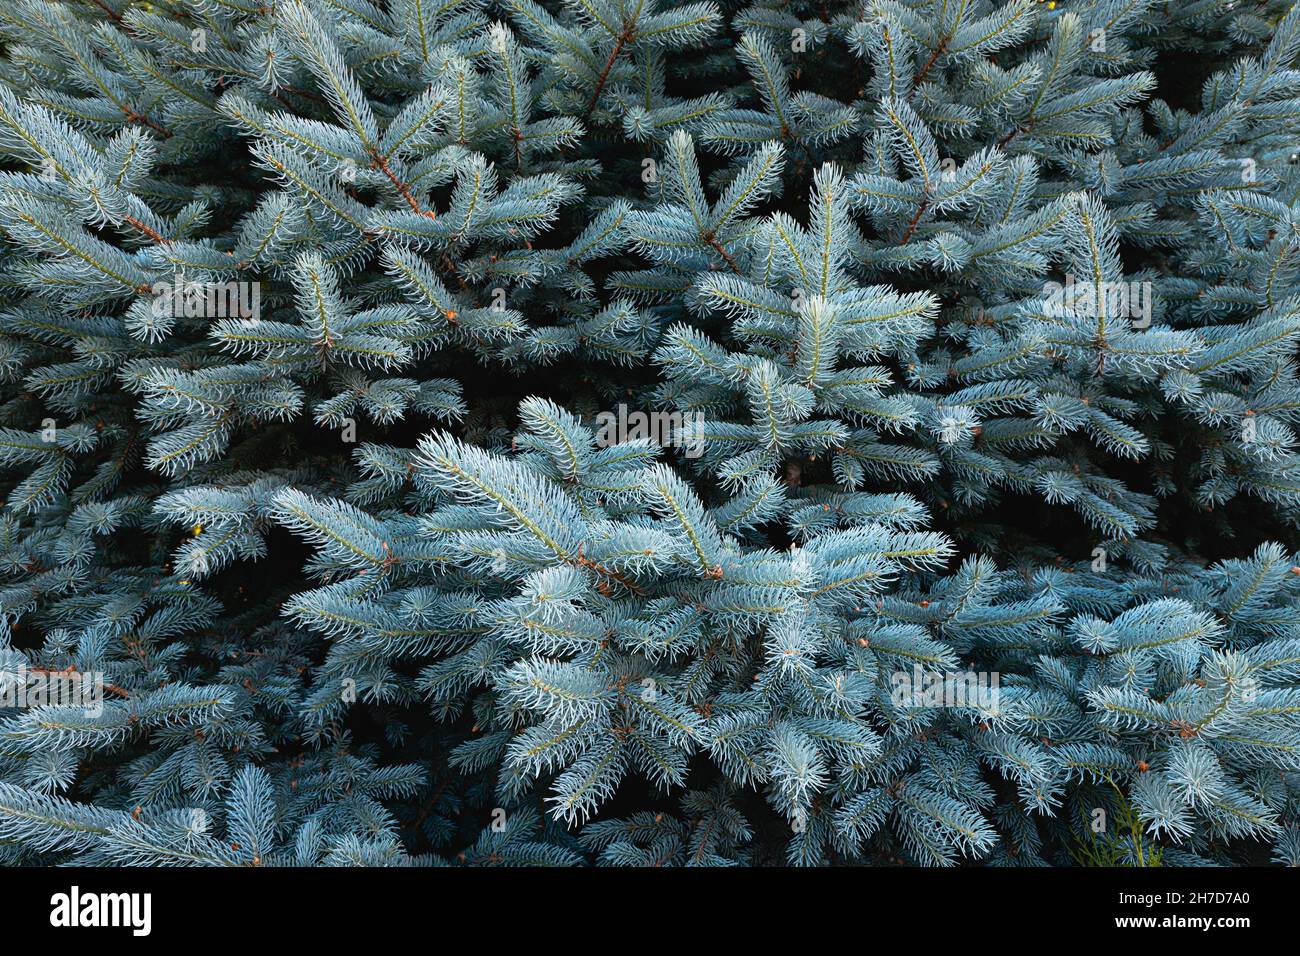 Blue spruce or Picea pungens branches with needles in a natural park as a background Stock Photo